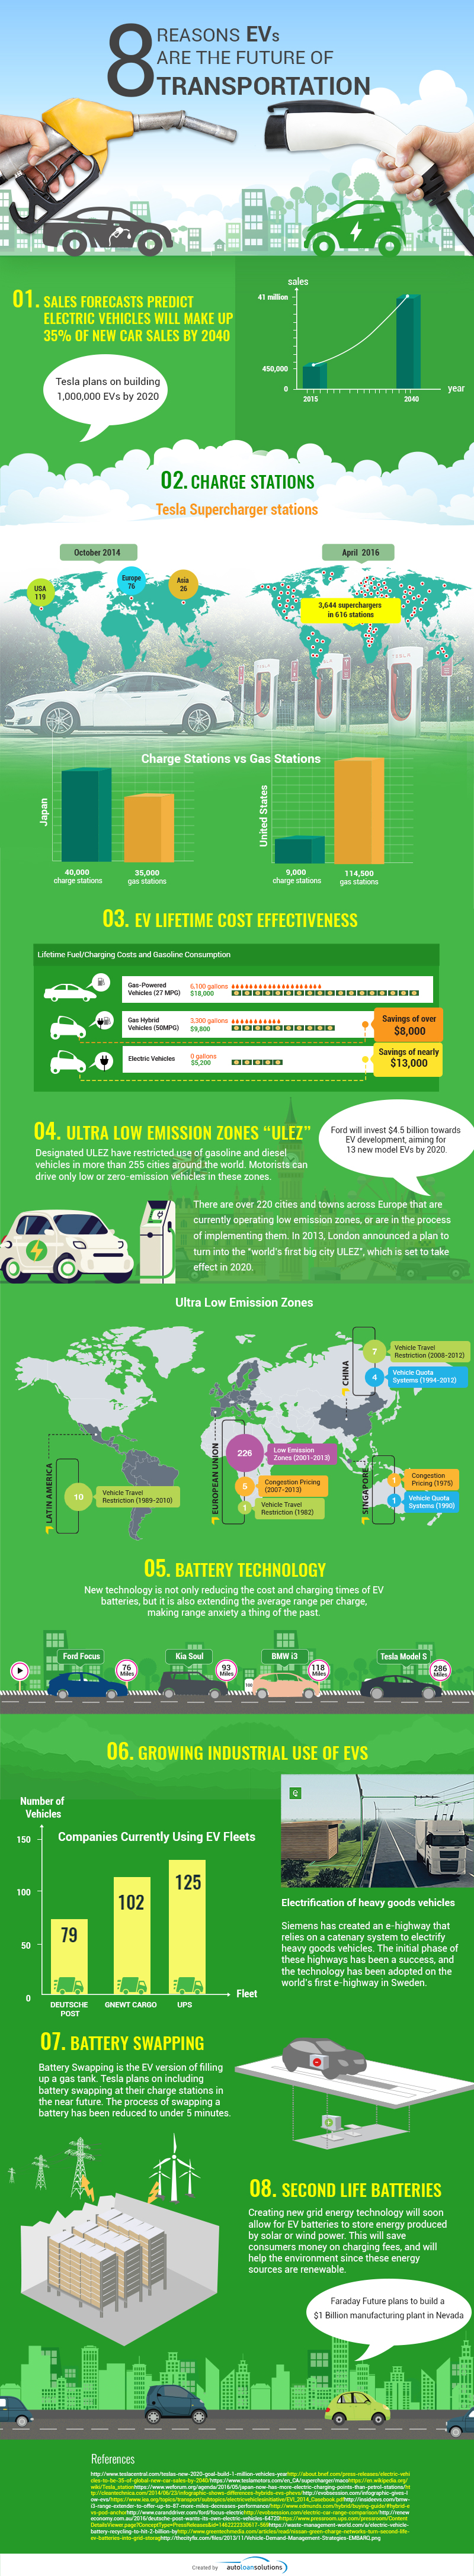 Top Reasons Electric Vehicles Are The Future Of Transportation